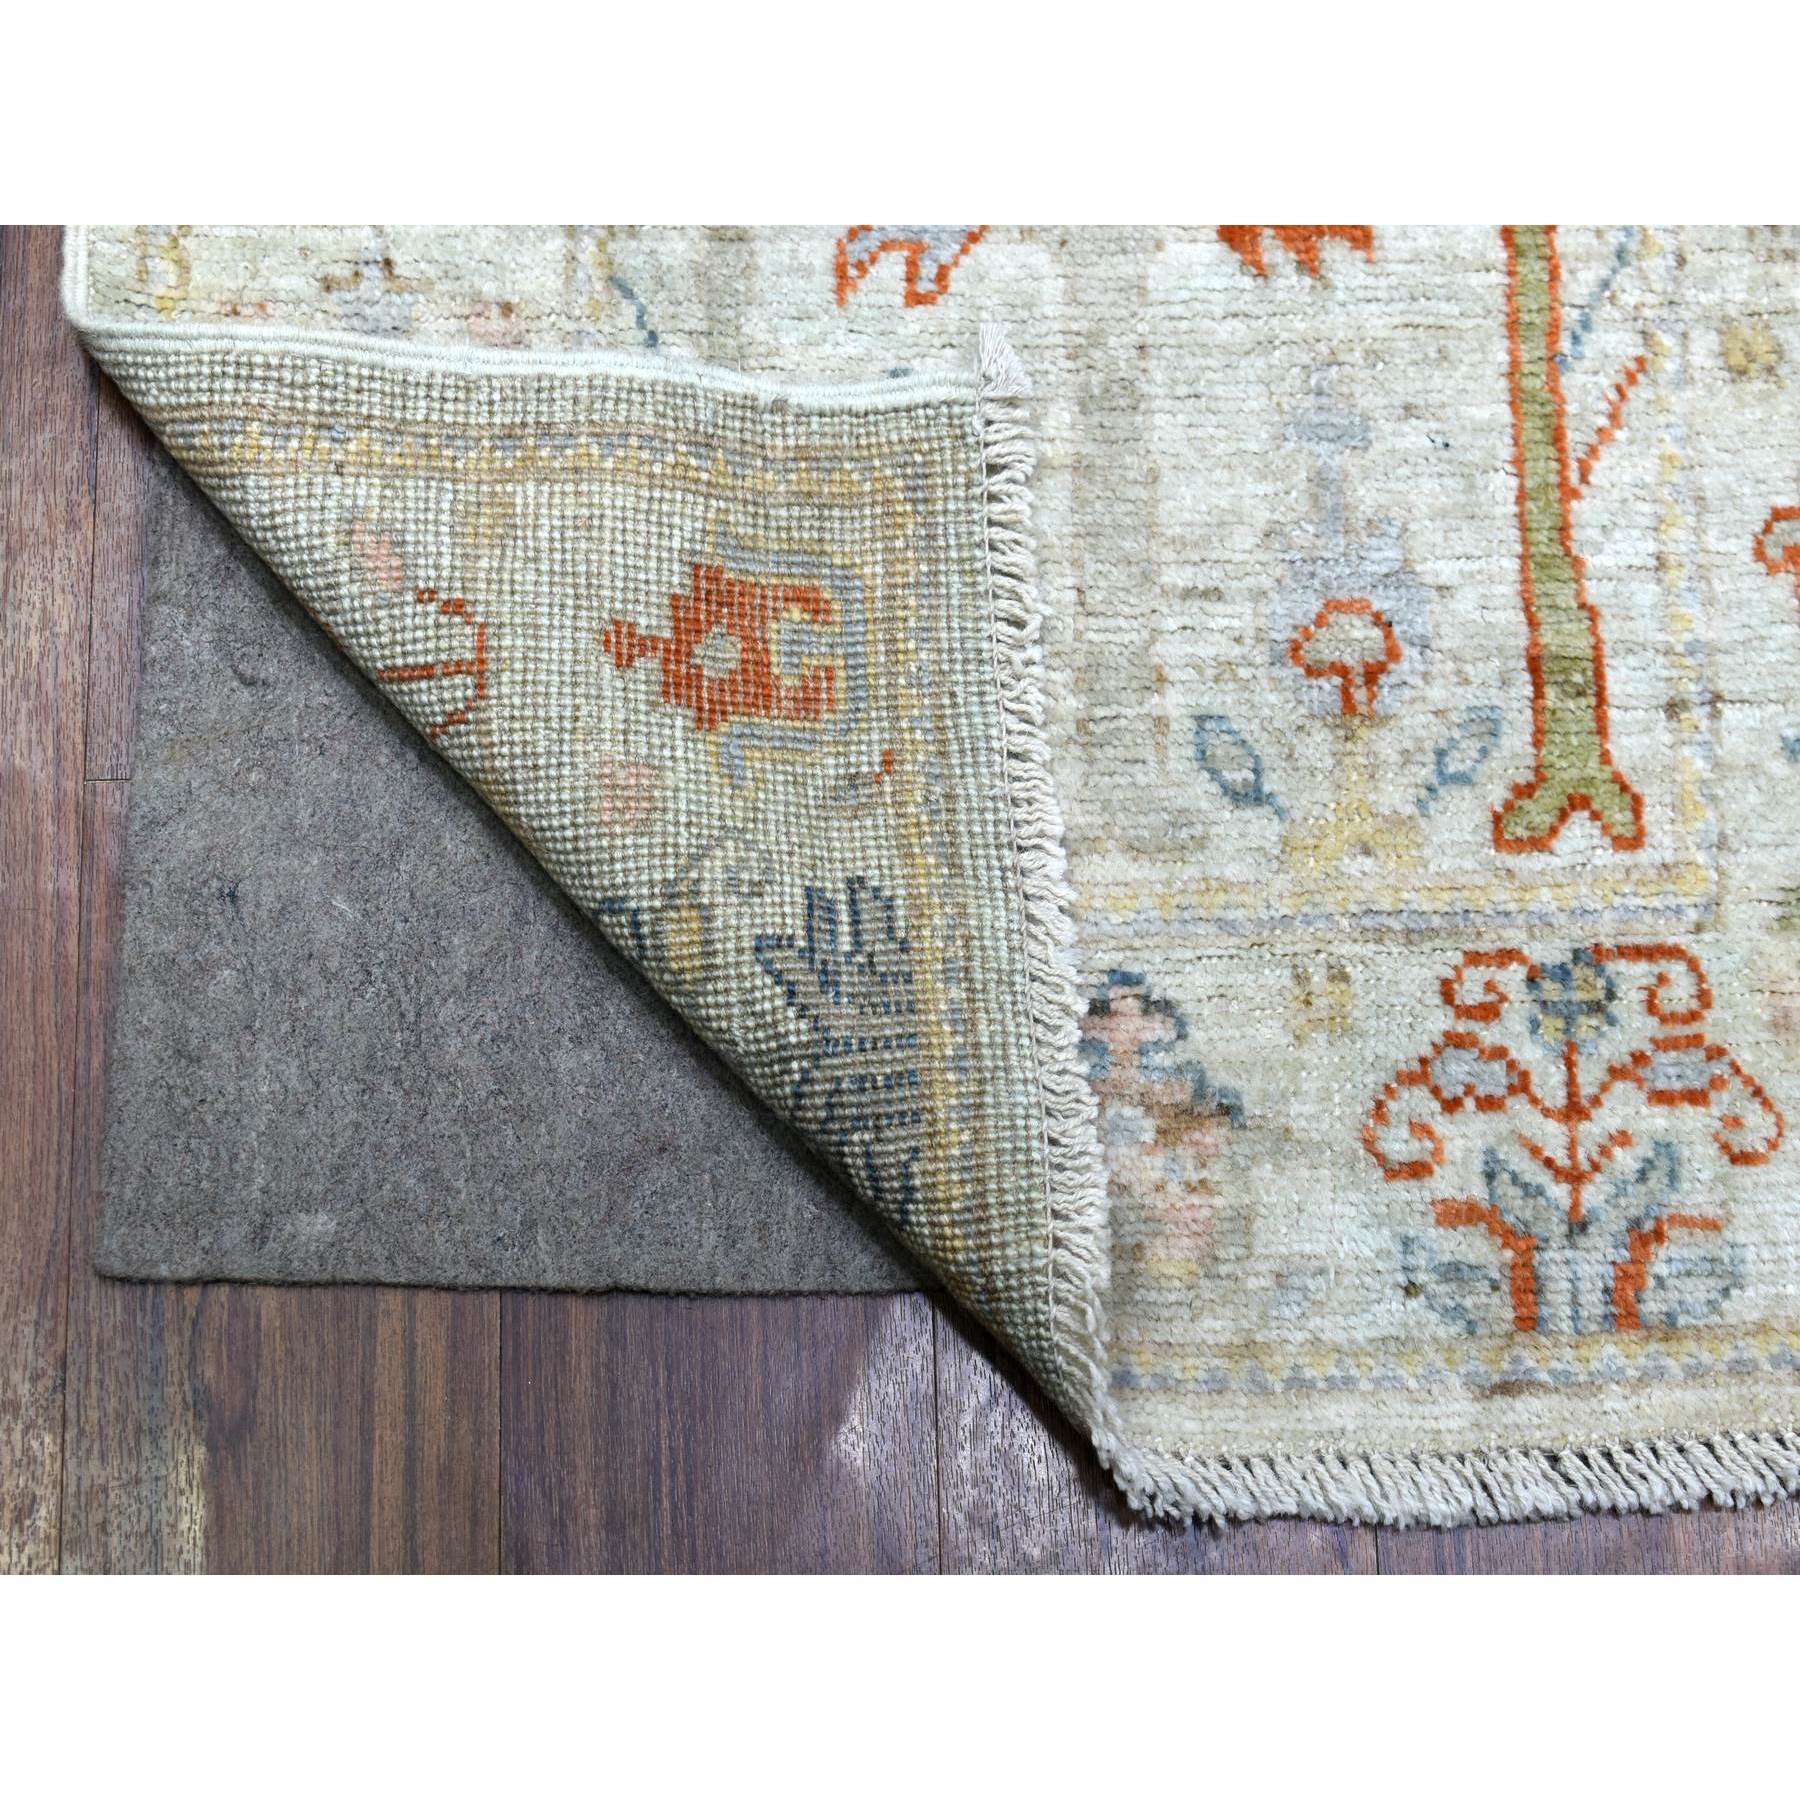 2'7"x15'4" Pop of Color Afghan Angora Oushak with Cypress and Willow Tree Design Ivory Hand Woven Soft Wool Oriental XL Runner Rug 